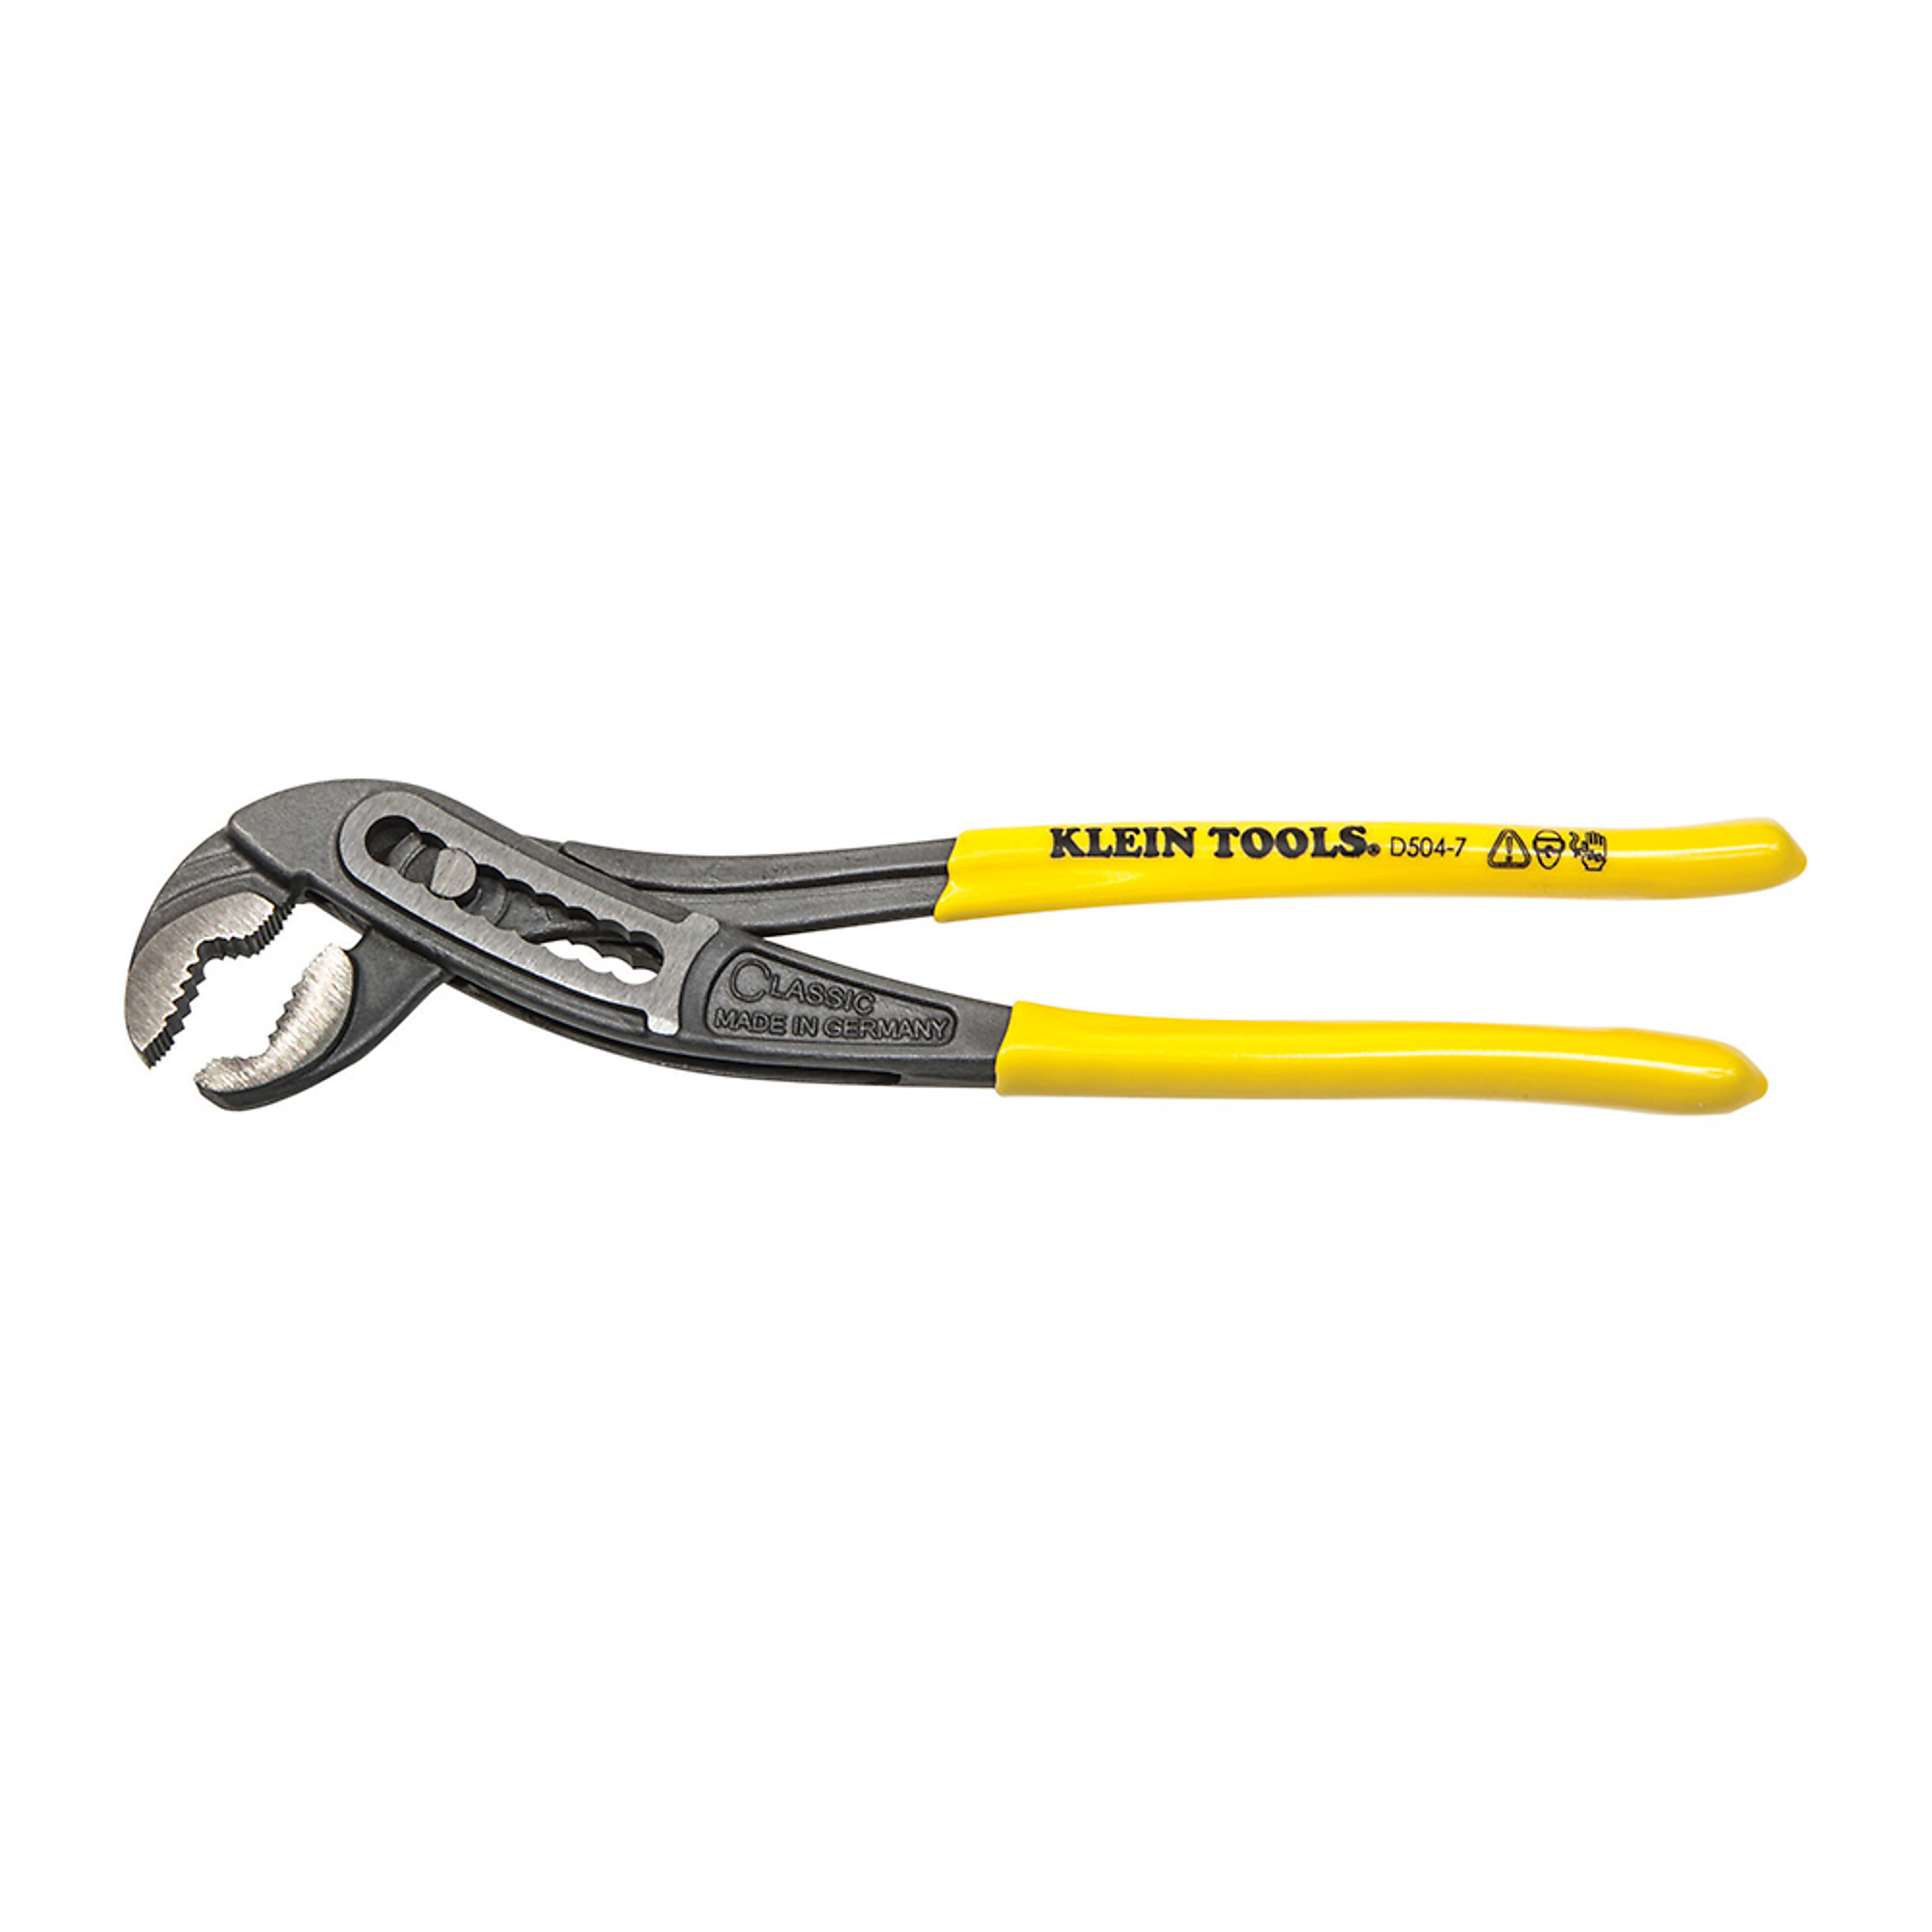 Klein Tools Klaw , 7Inch Classic Klaw Pump Pliers, Pieces (qty.) 1 Material Steel, Jaw Capacity 1.38 in, Model D504-7